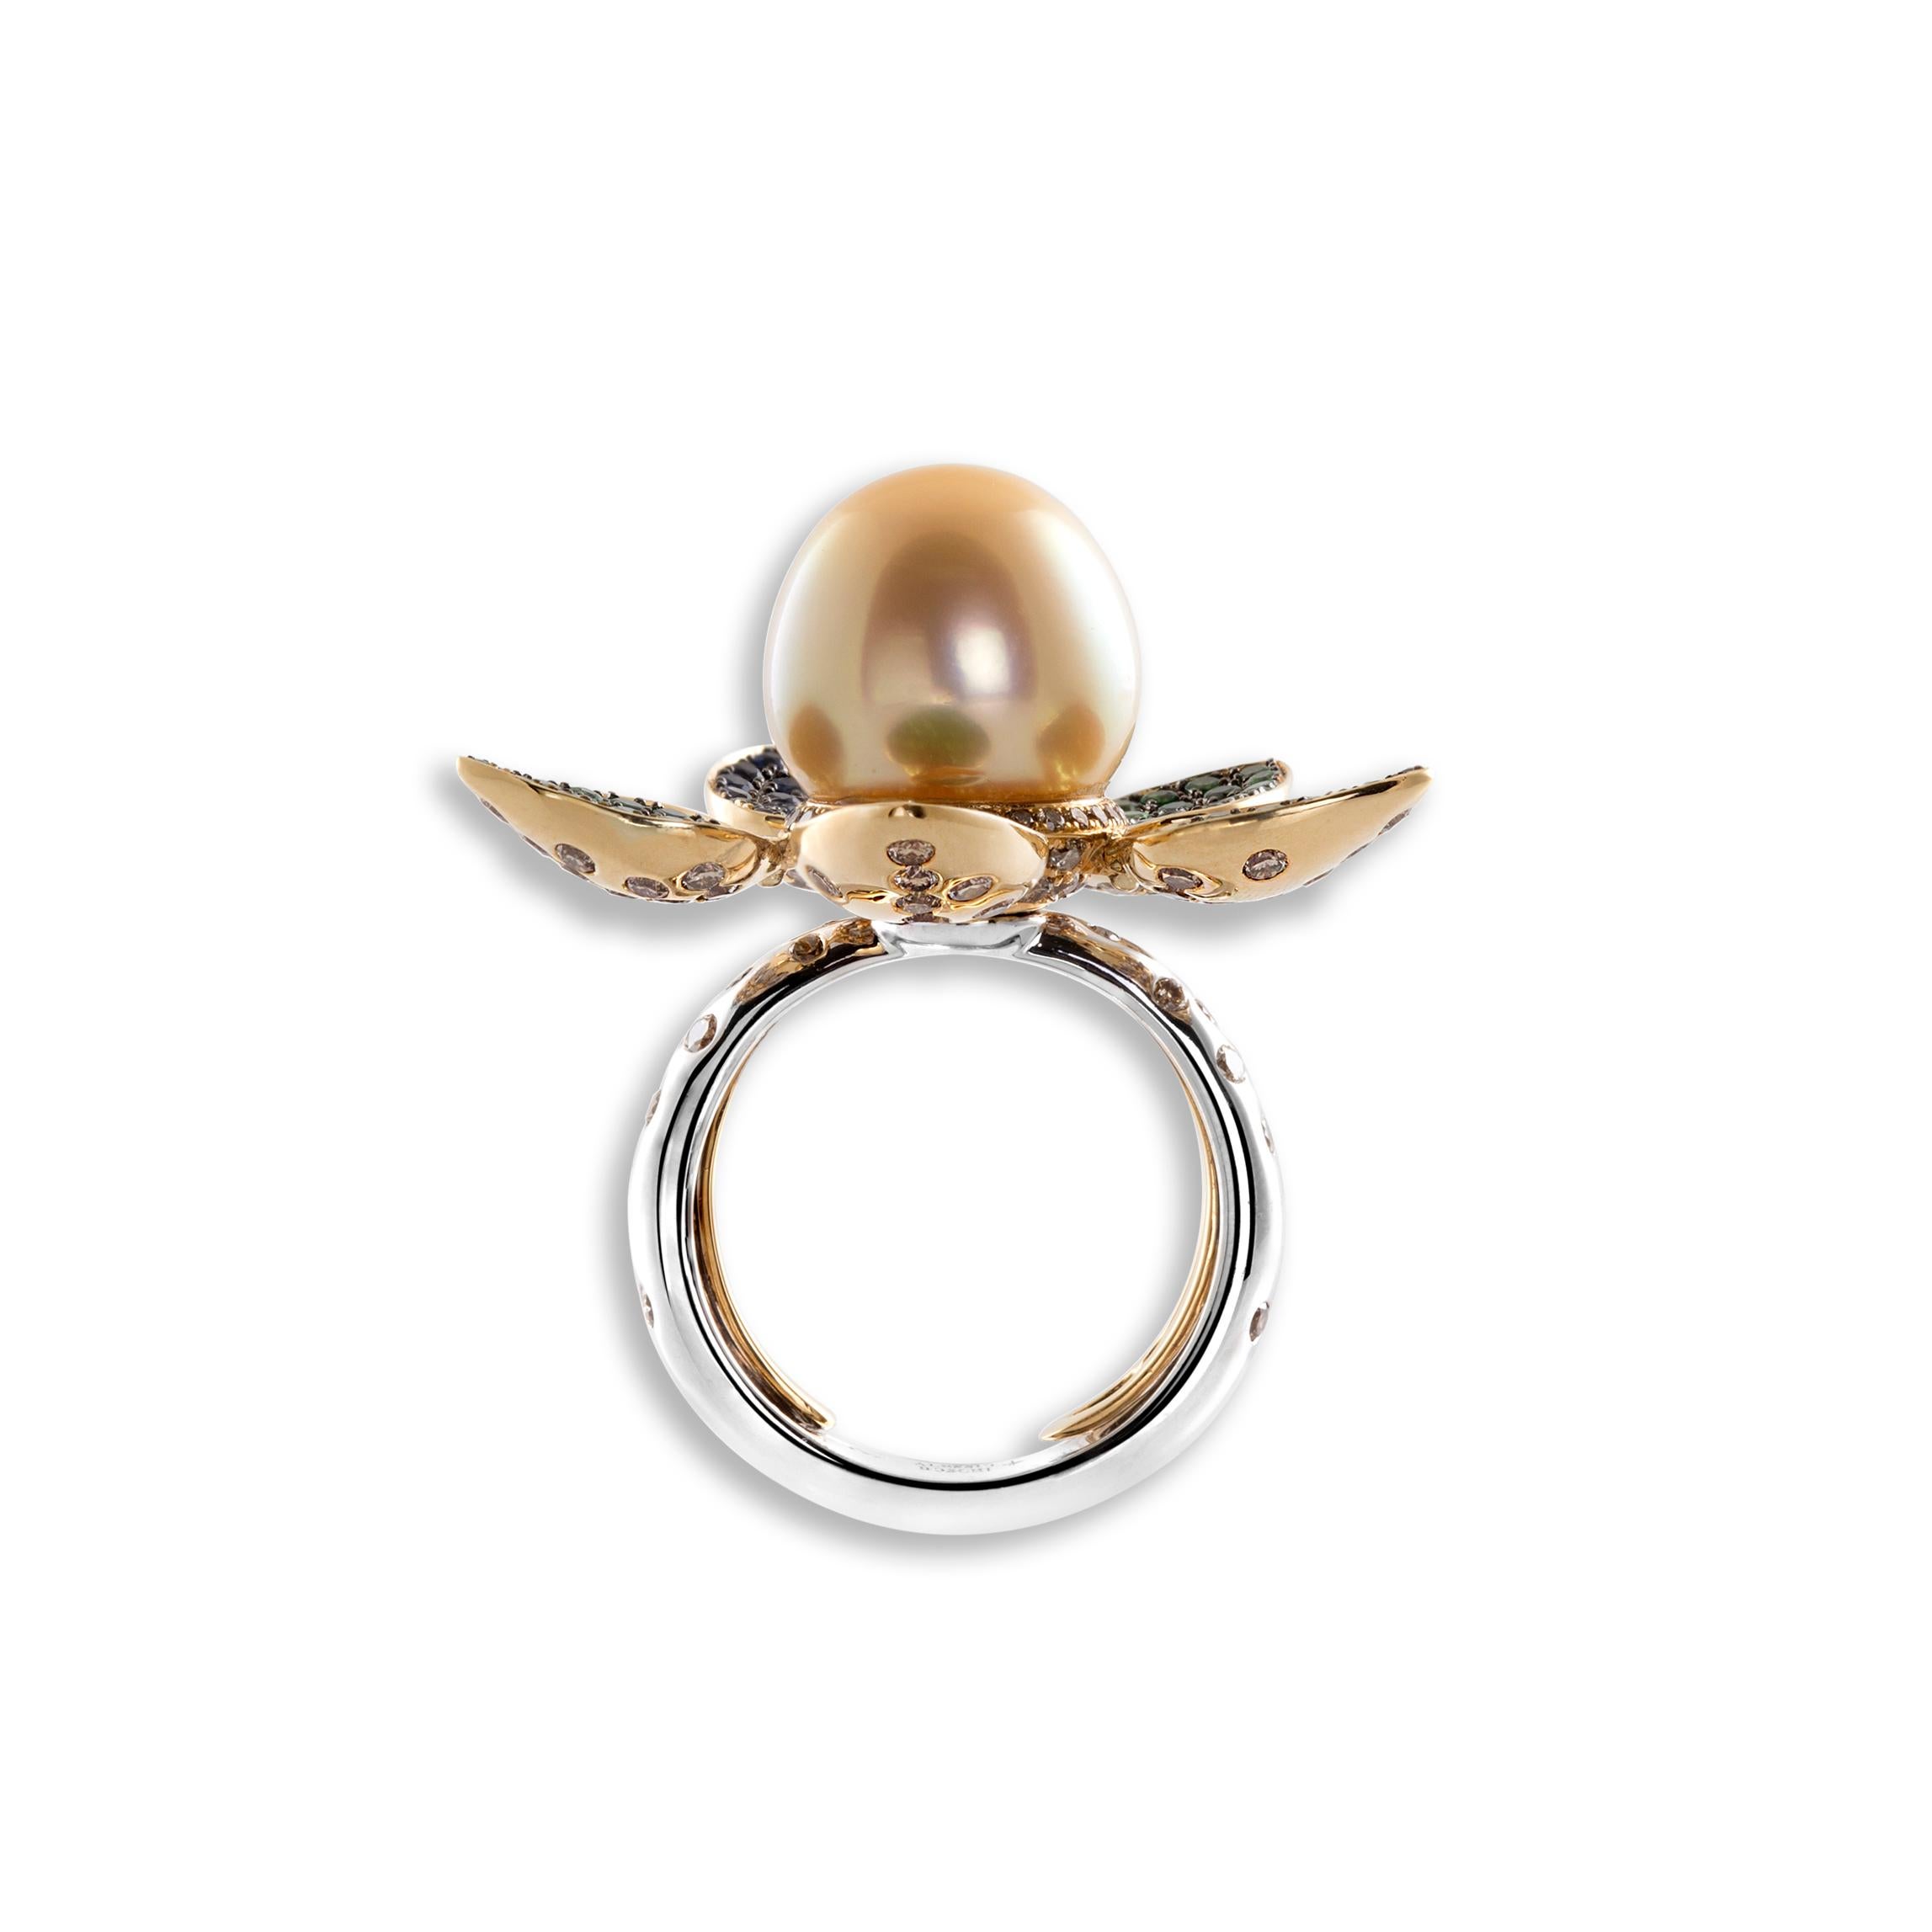 Brown Diamonds 2.29 cts - Blue Sapphires 0.37 cts - Tsavorites 1.53 cts - Golden South Sea Pearl 13.5 mm                                                         

This Ring is inspired by the Lotus plant with its flower crowning a pearl over a long